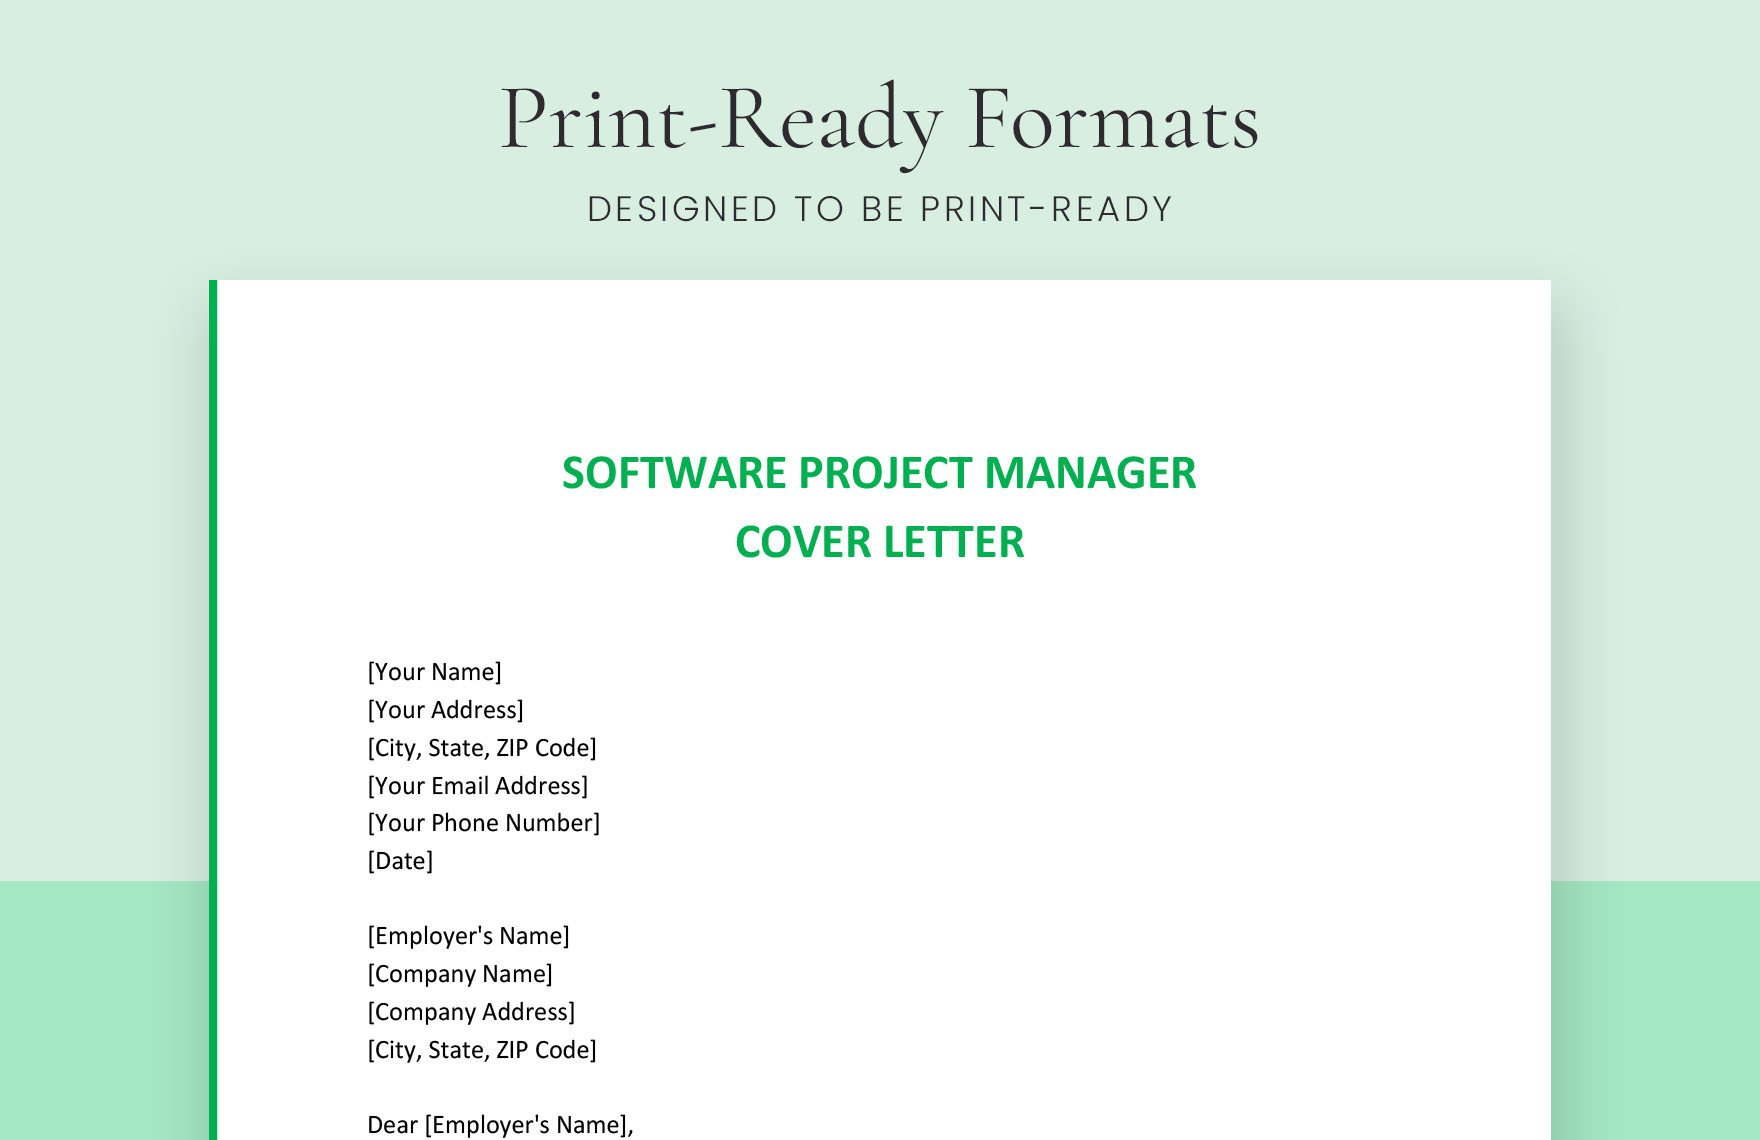 Software Project Manager Cover Letter